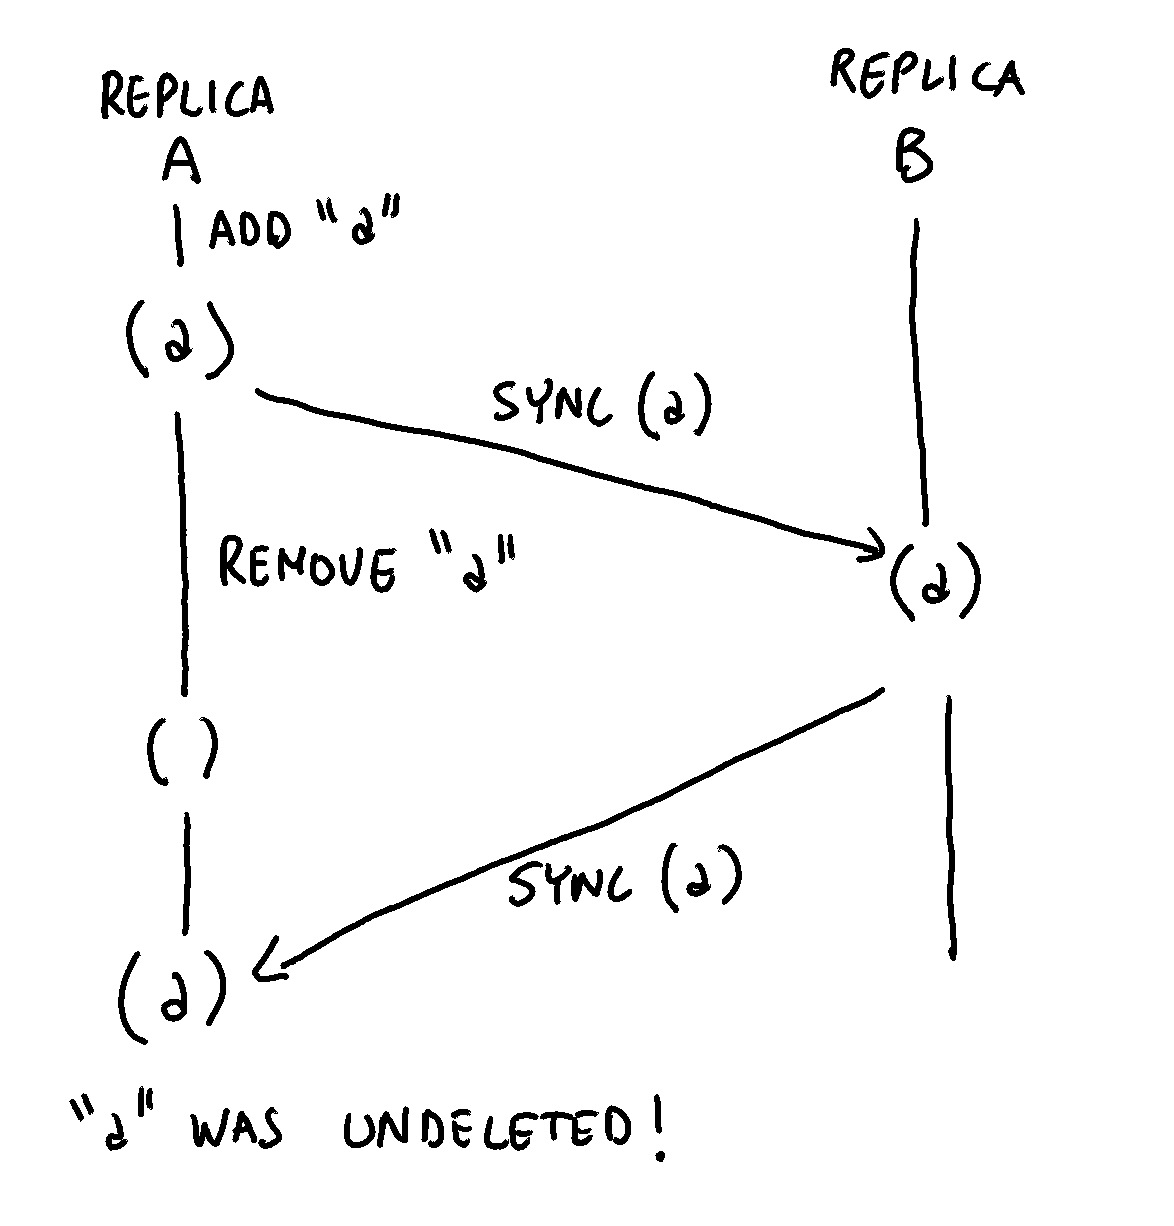 After the second synchronization, the “a” element is undeleted from replica A, which is not the expected behavior.